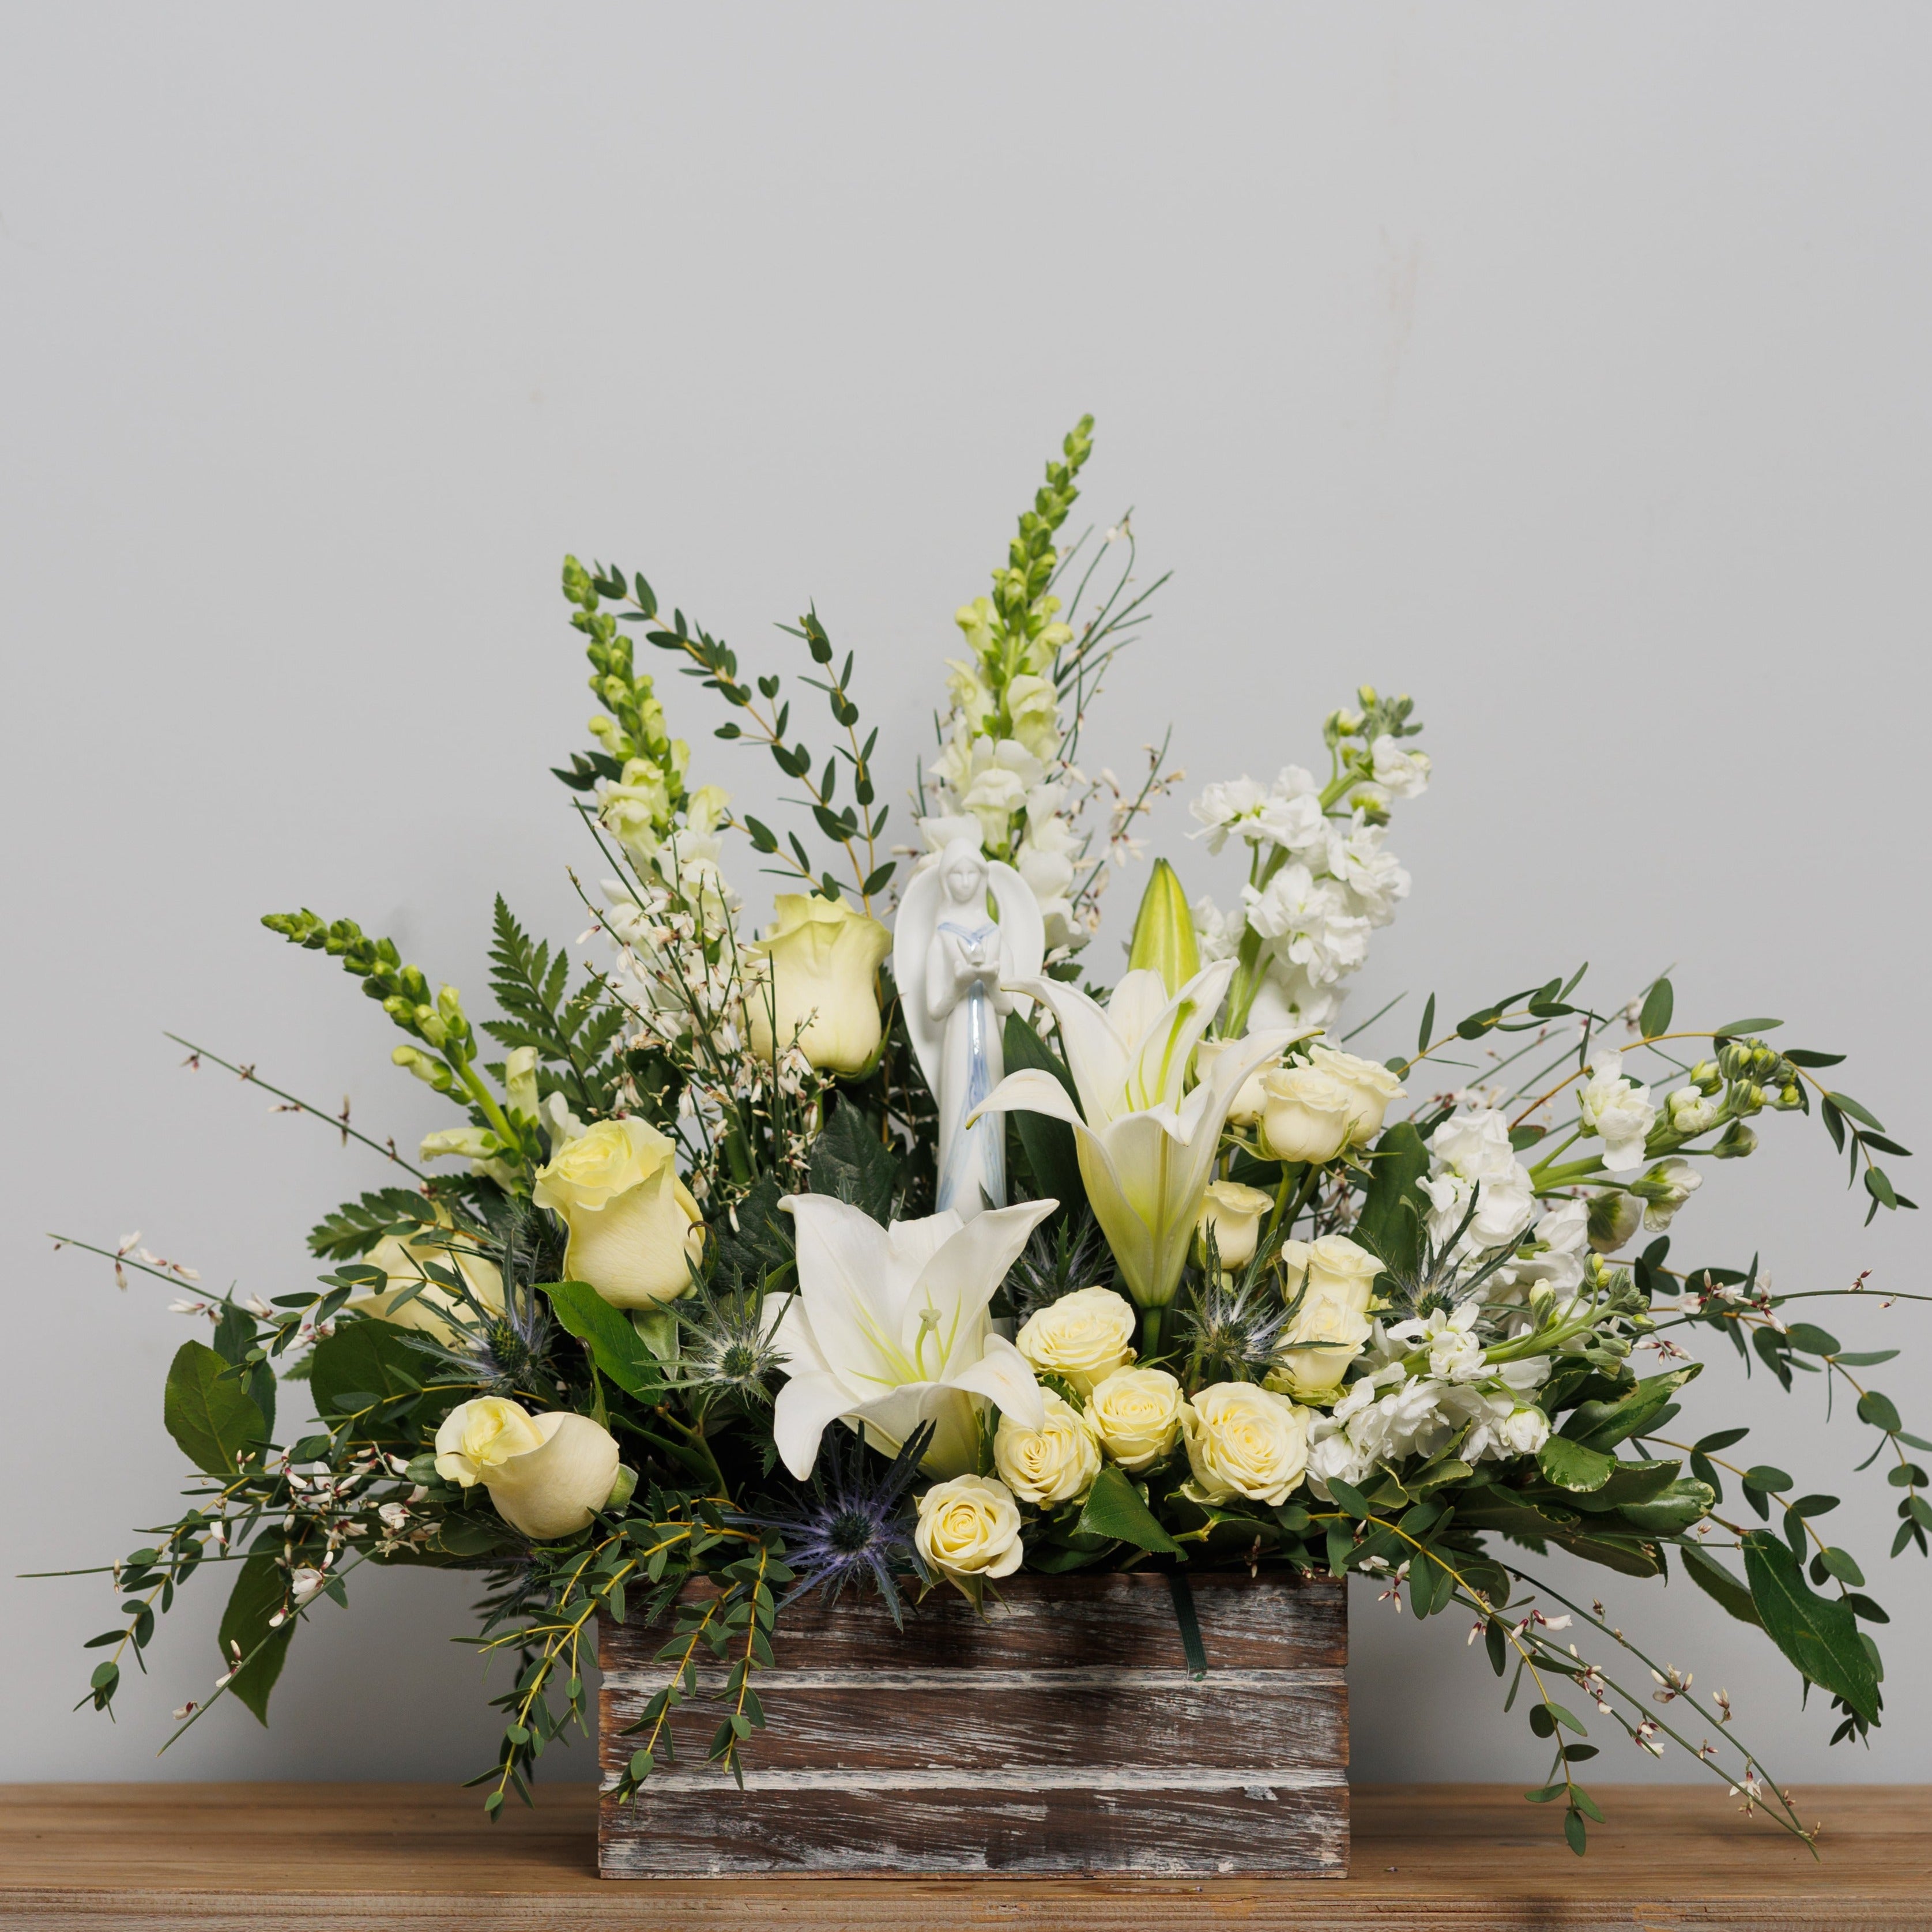 All all white flower arrangement in a distressed box container with a keepsake ceramic angel.